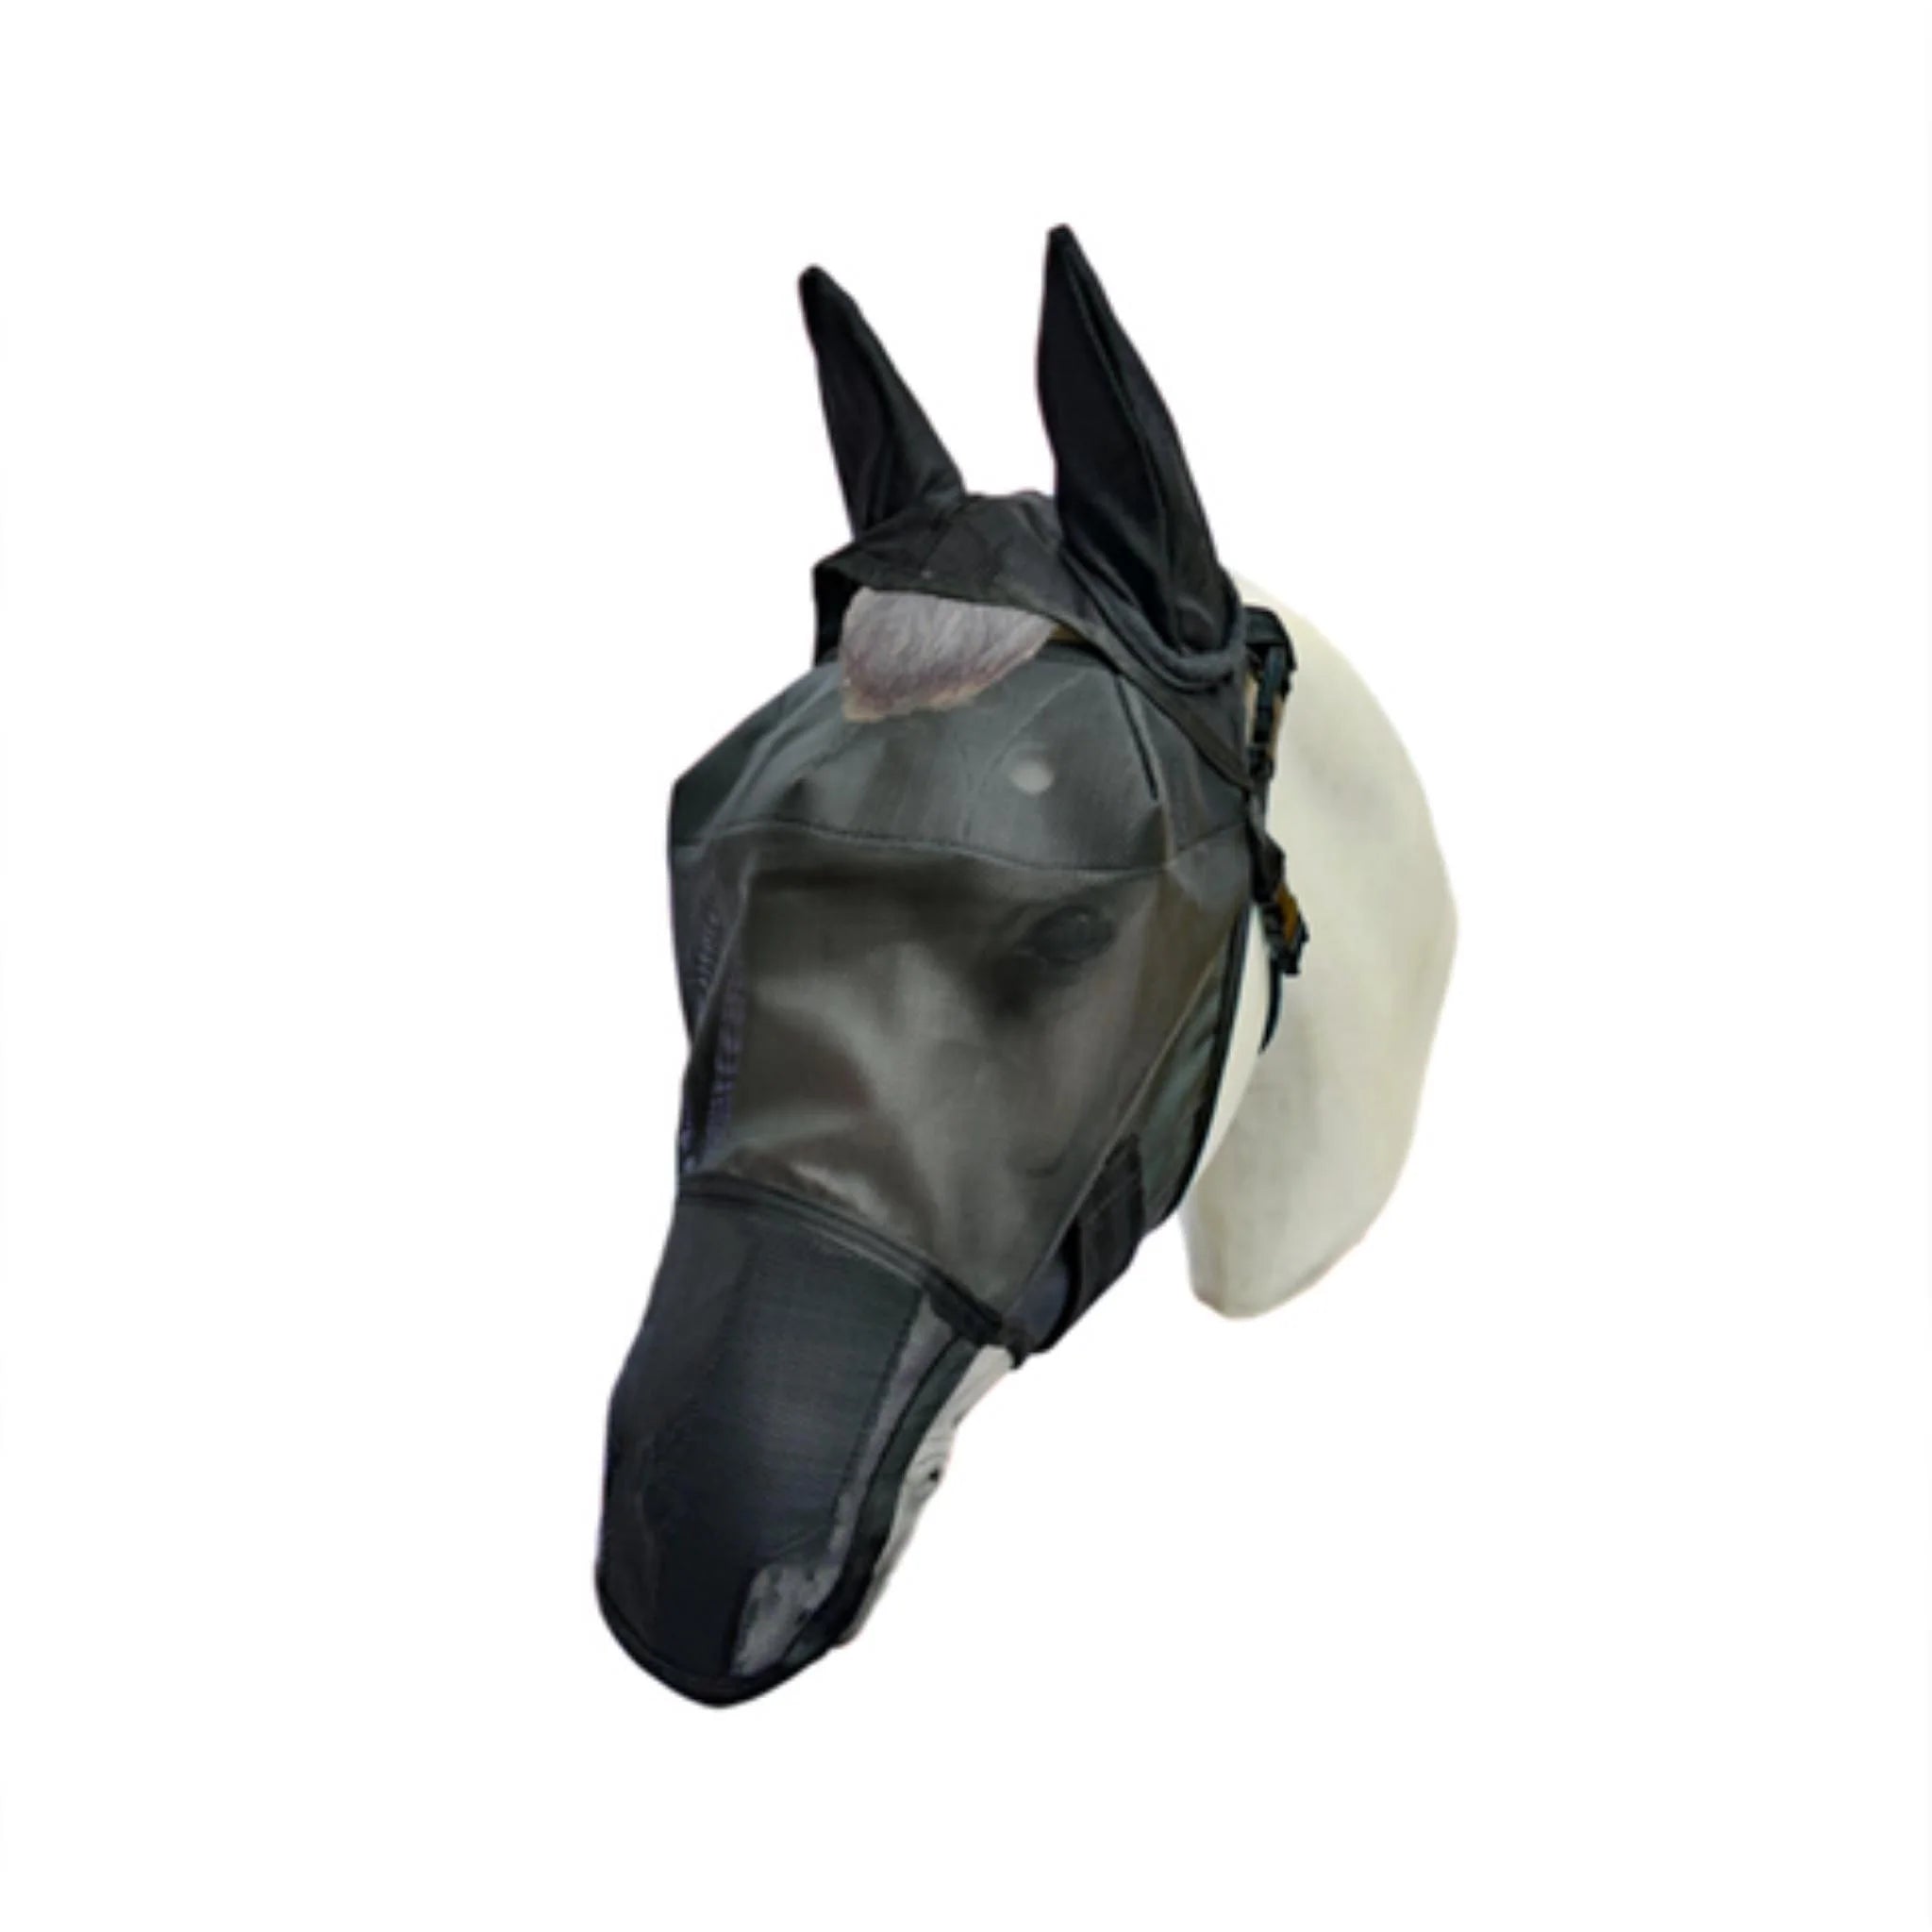 Equivizor-Fly-Mask-With-Ears-And-Nose-The-Horse-Rug-Whisperer_2048x_83d72463-7667-4035-8016-341a79e68554.webp